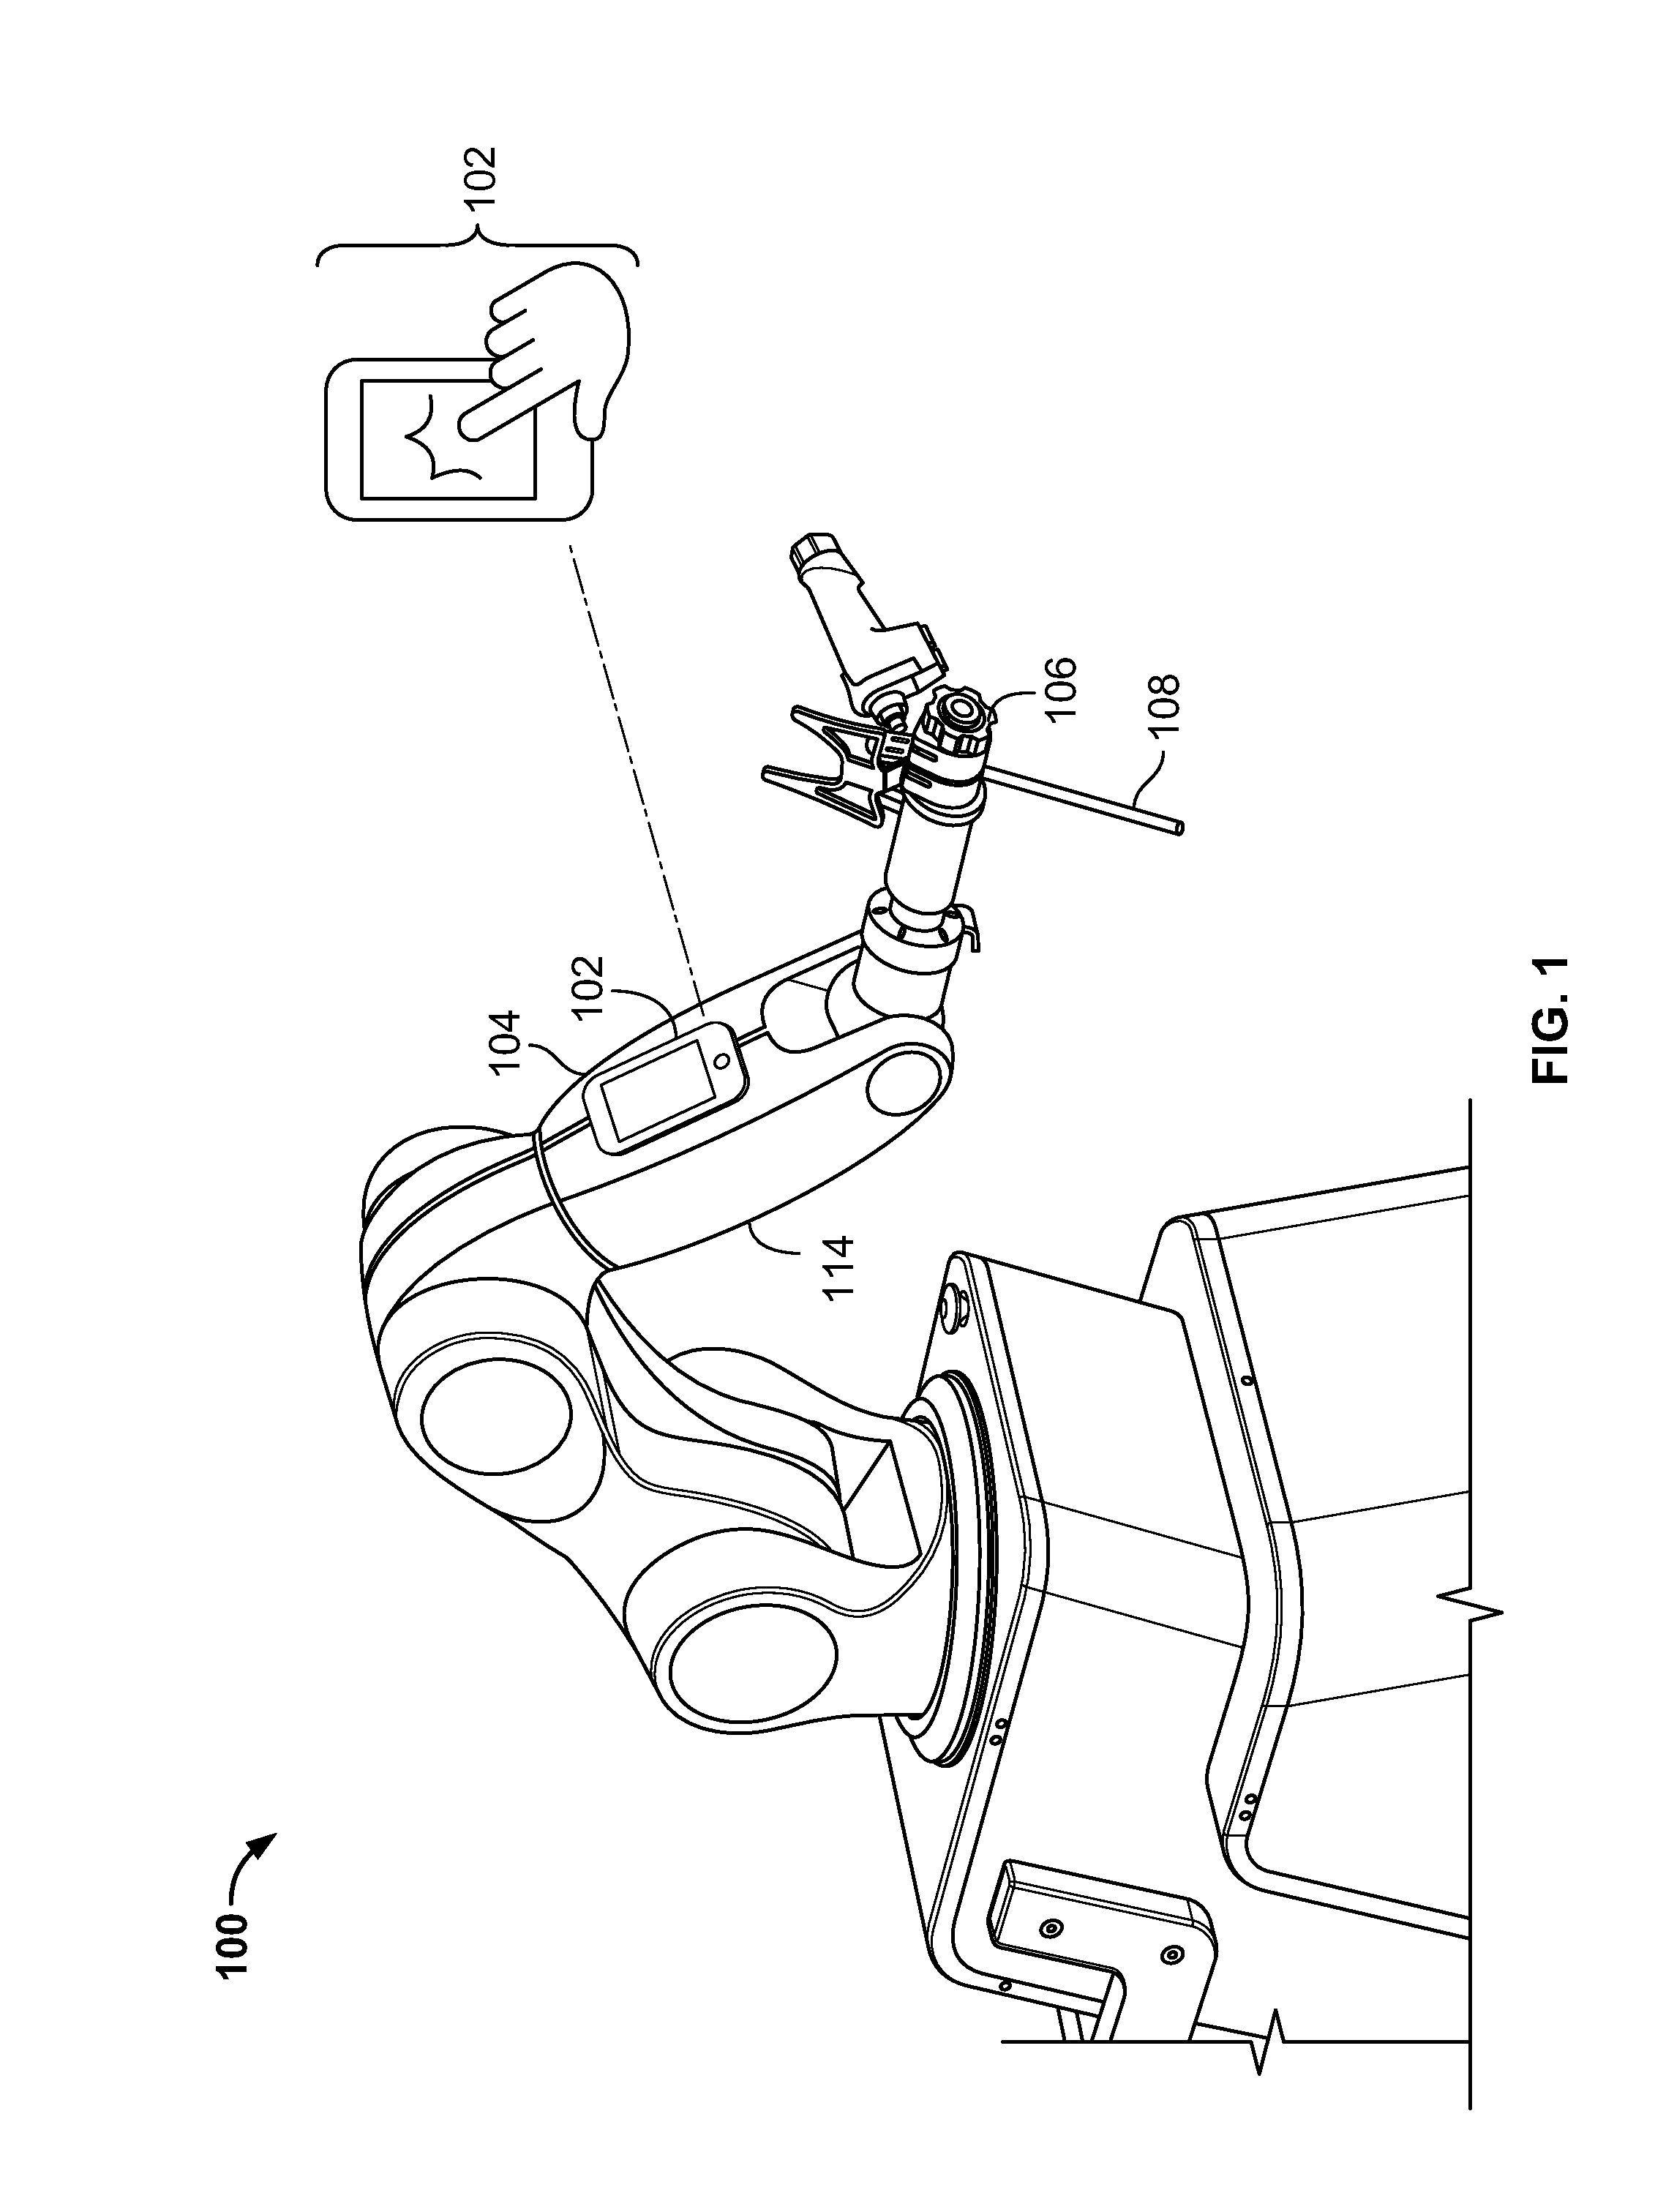 Robot-Mounted User Interface For Interacting With Operation Room Equipment